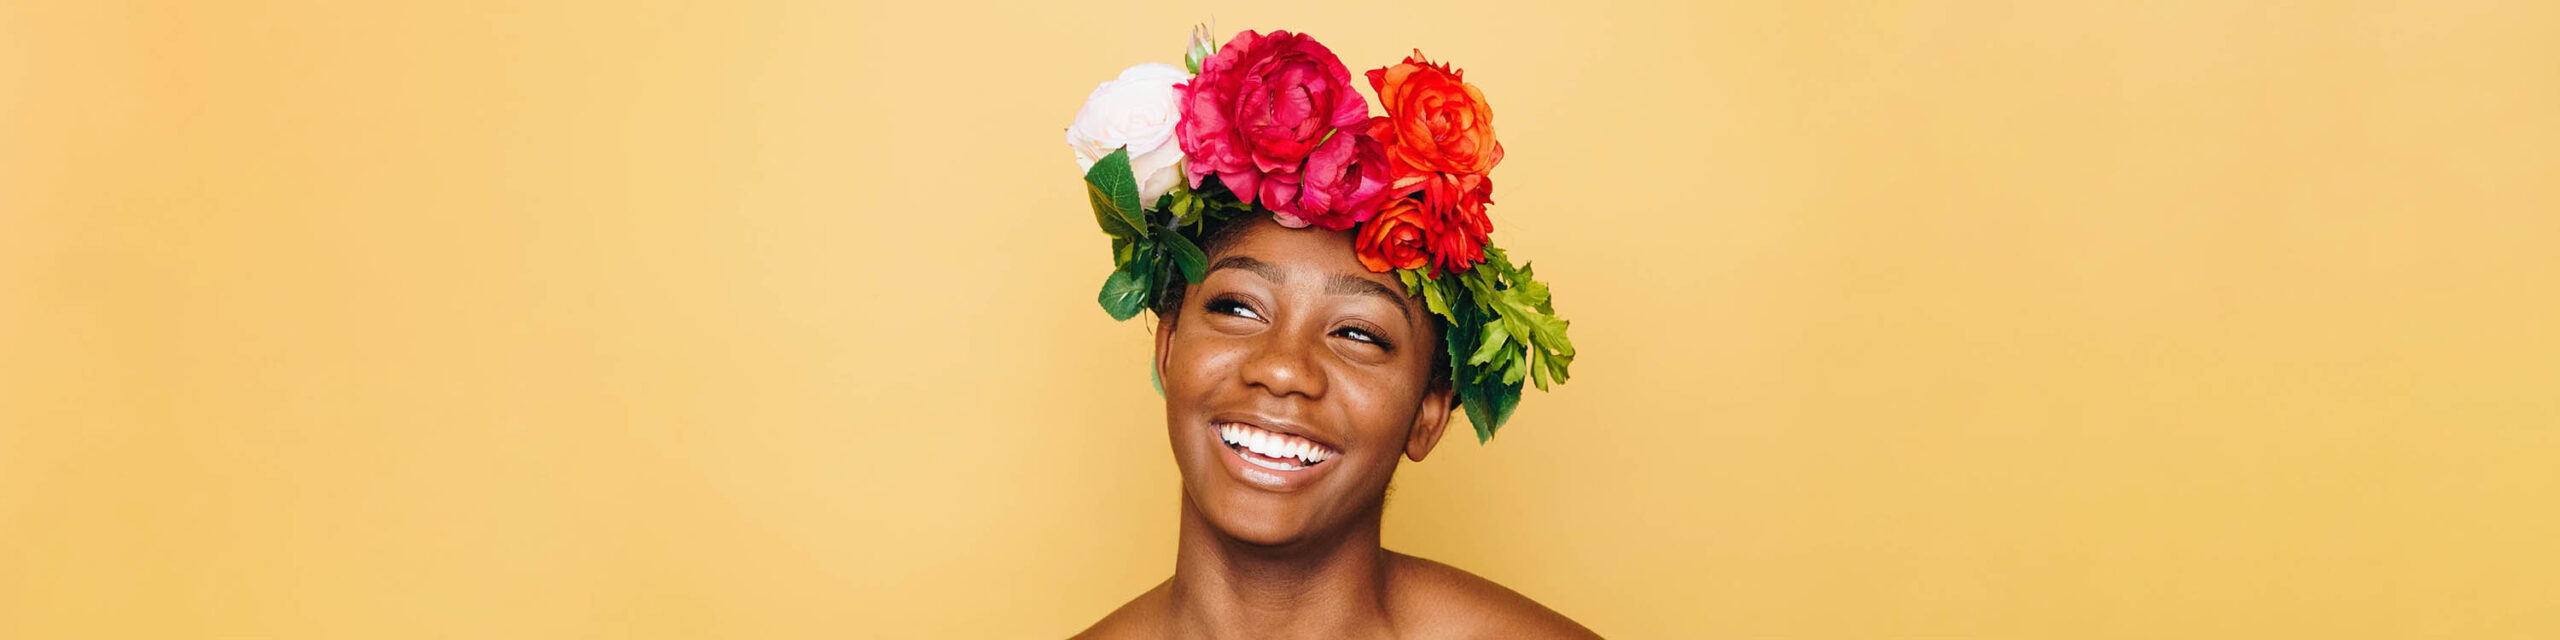 Headshot of Black woman smiling with flower crown on head